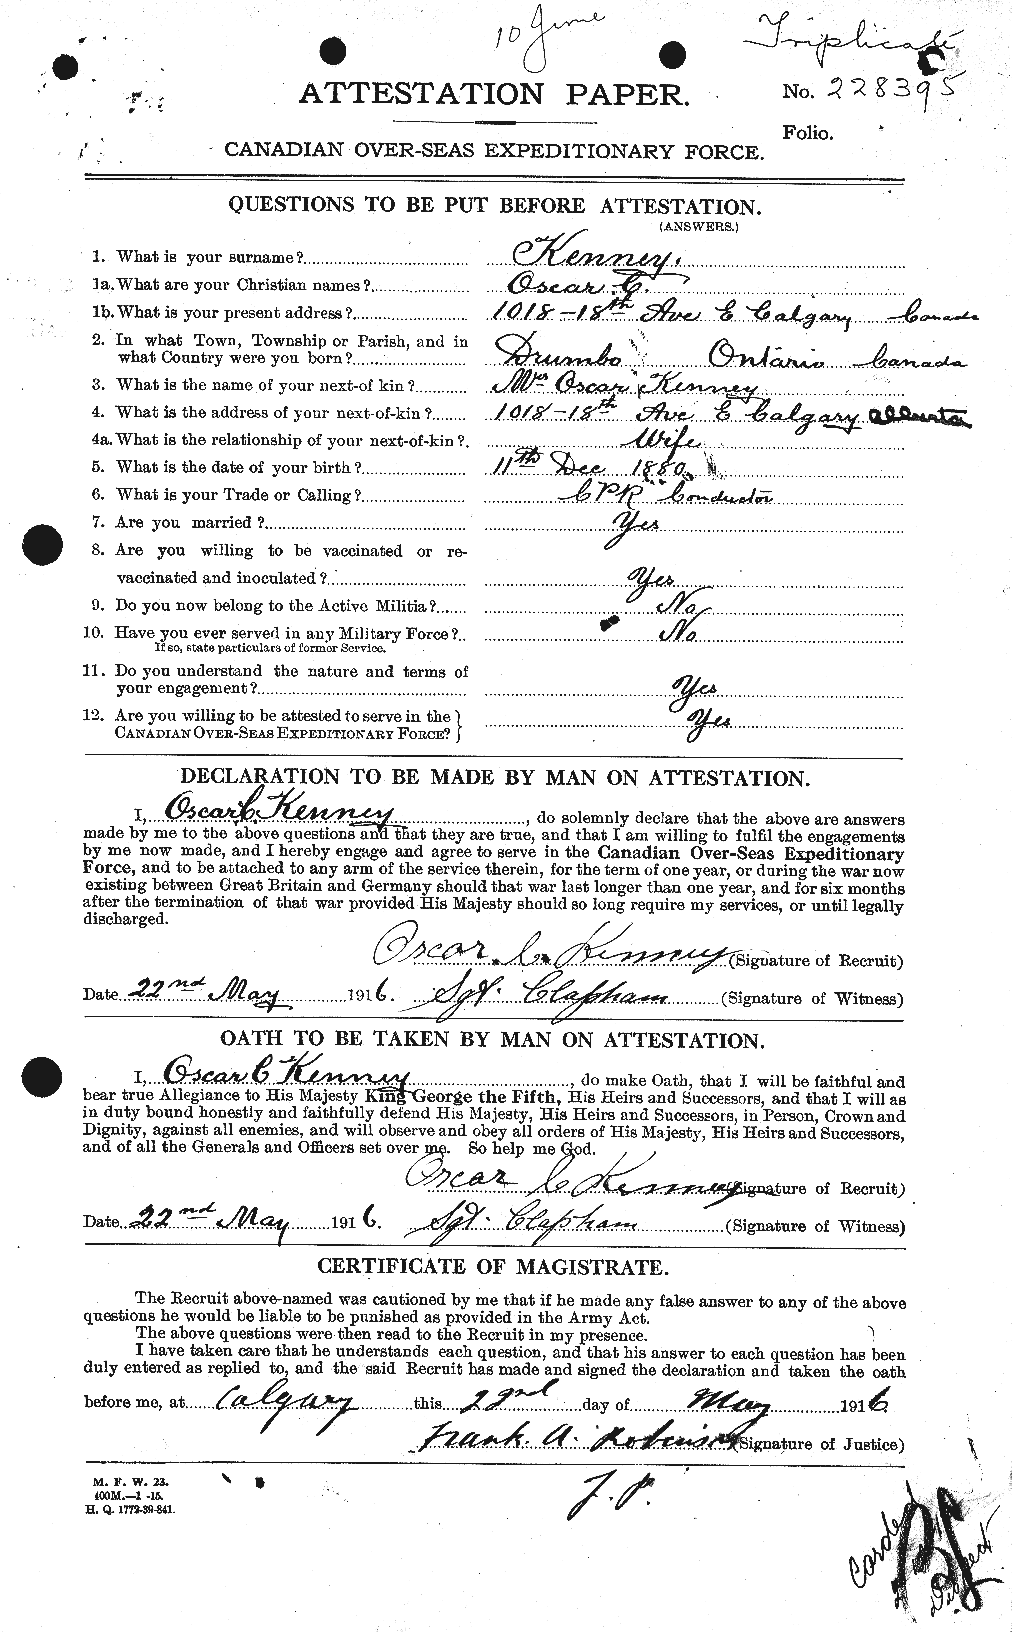 Personnel Records of the First World War - CEF 432942a